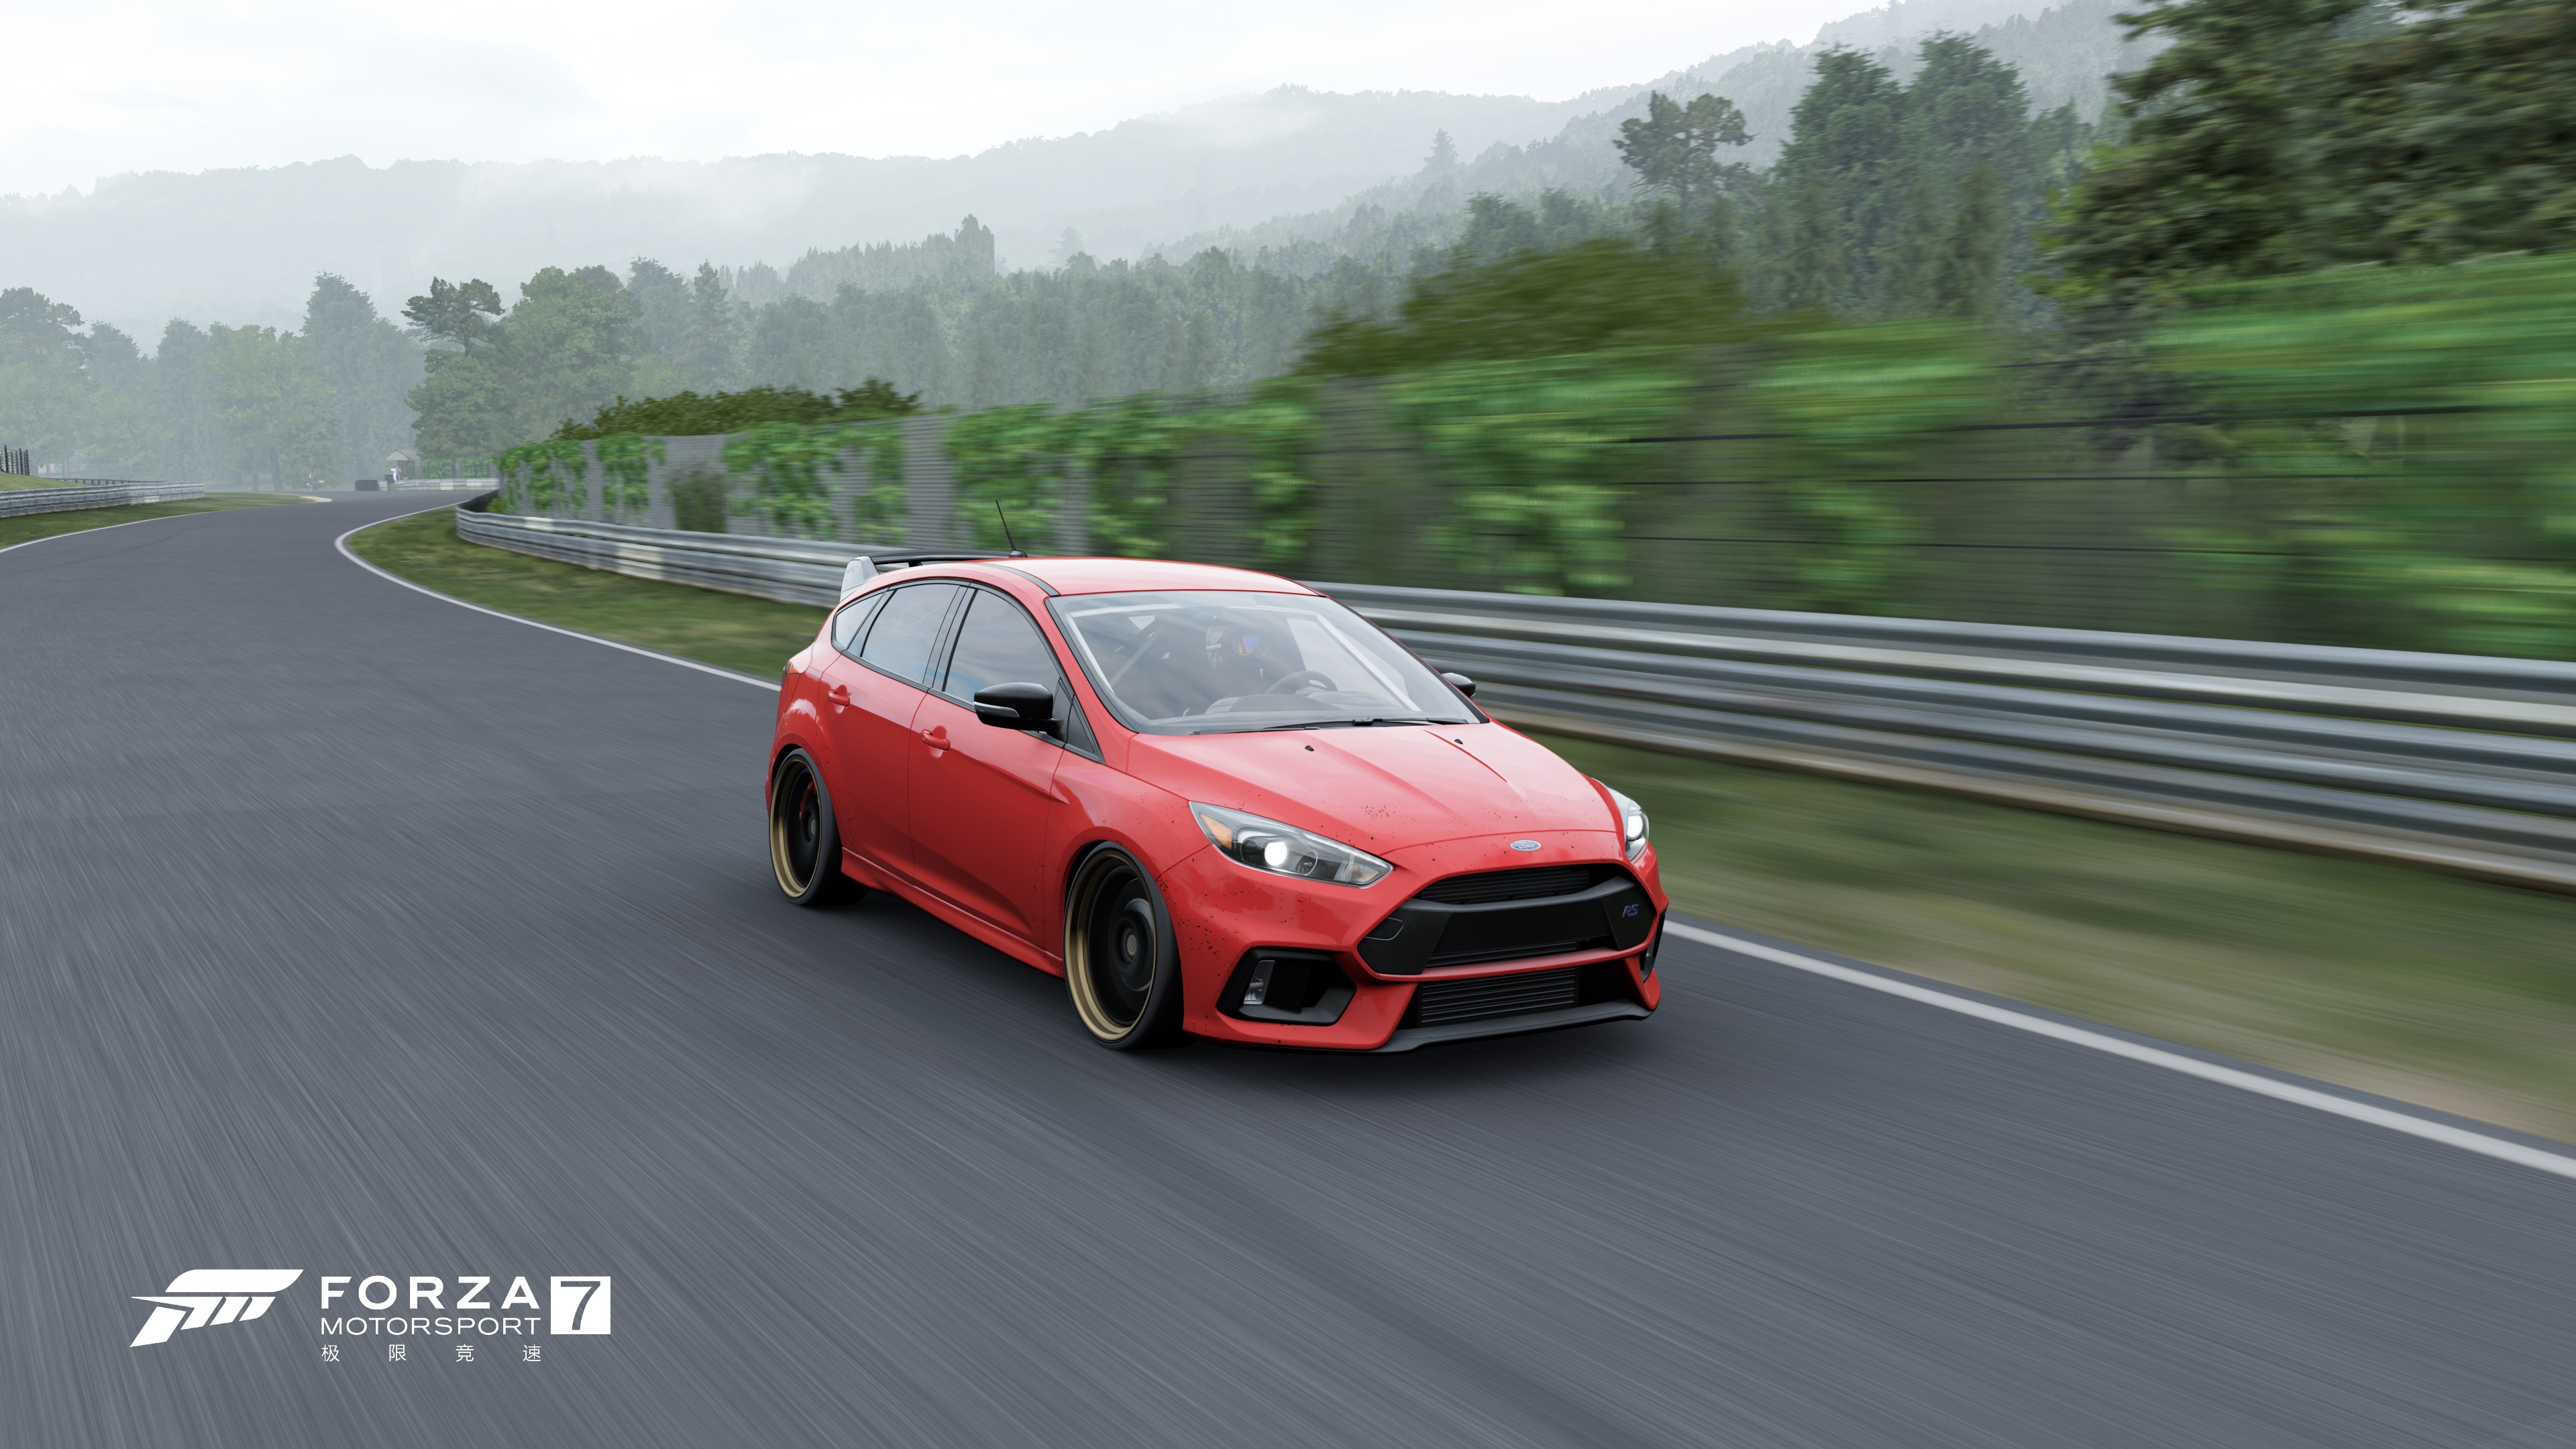 General 3840x2160 Ford Focus RS car Ford vehicle Forza Motorsport 7 video games race tracks red cars Turn 10 Studios racing